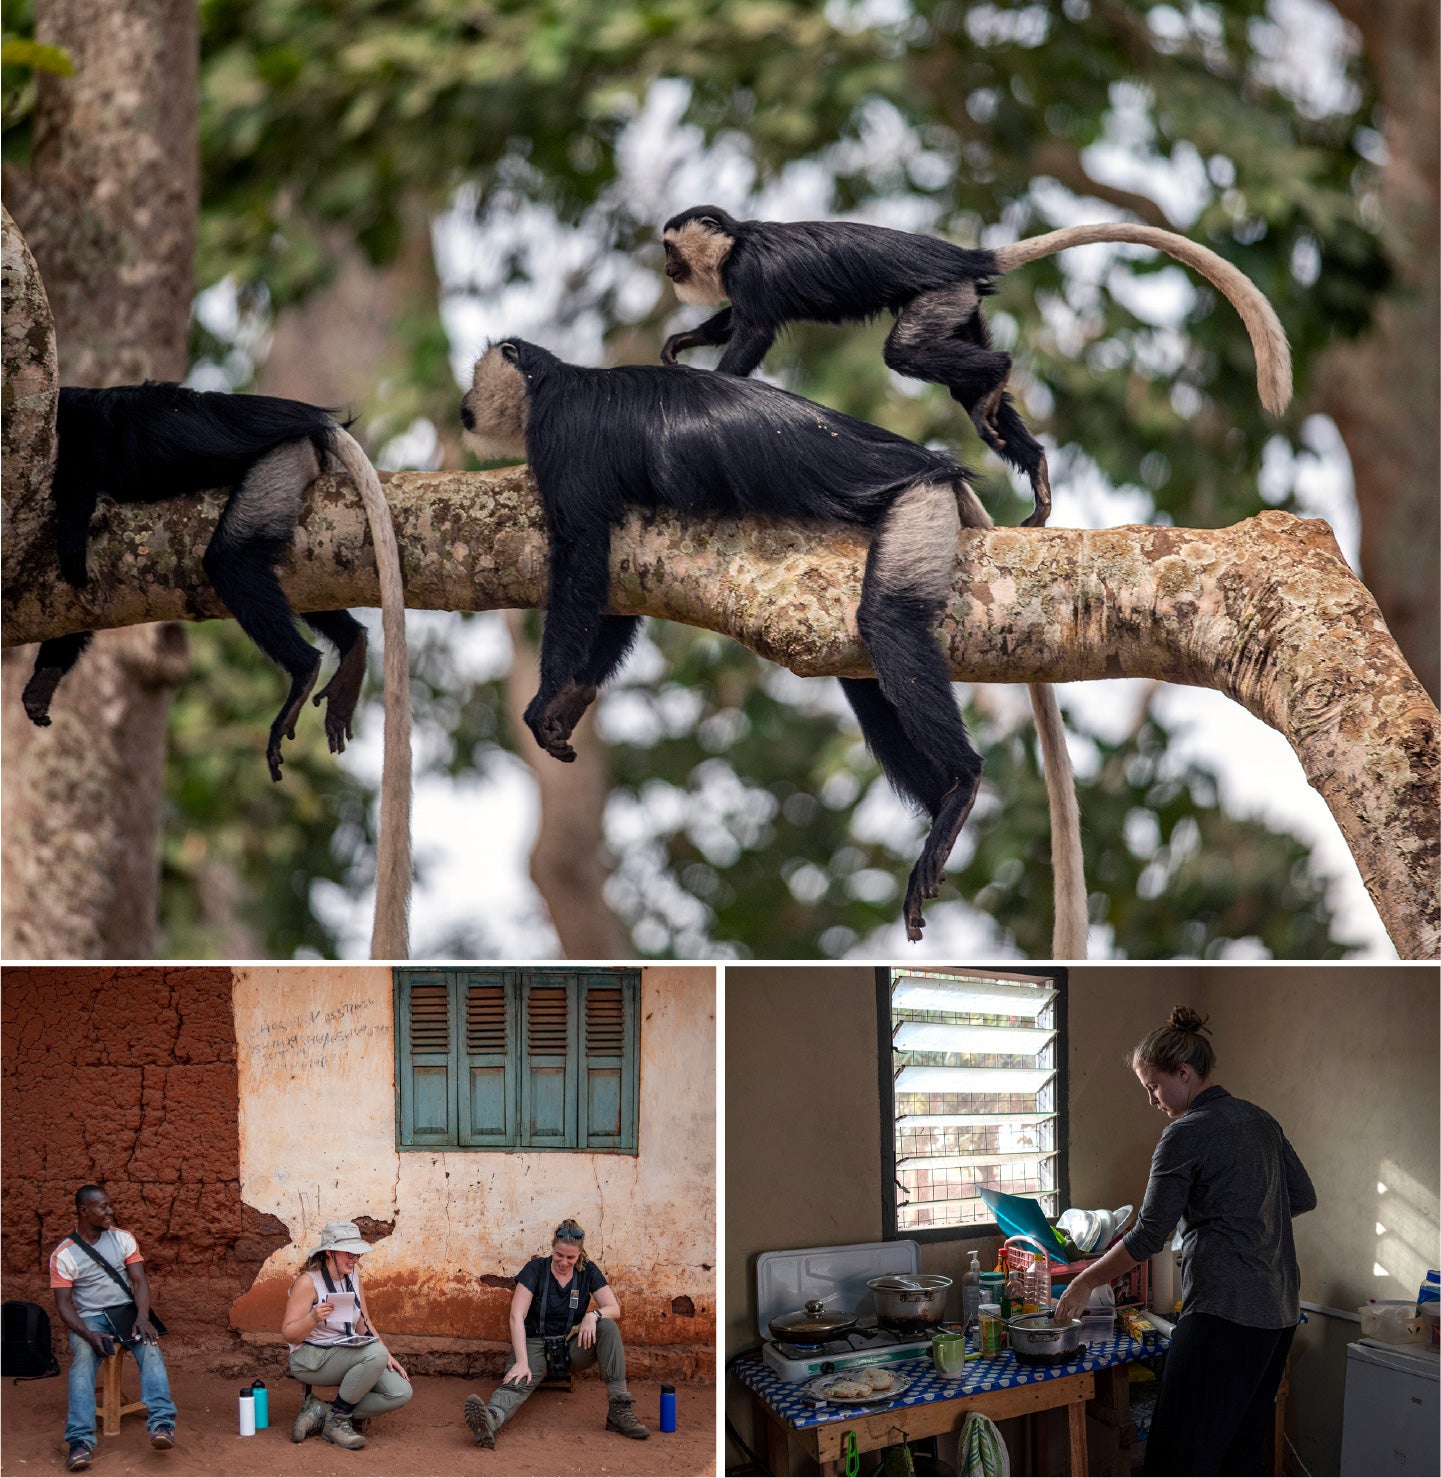 (Top) Young monkey jumping over adult monkey (Bottom left) Break time (Bottom right) Diana in the camp kitchen